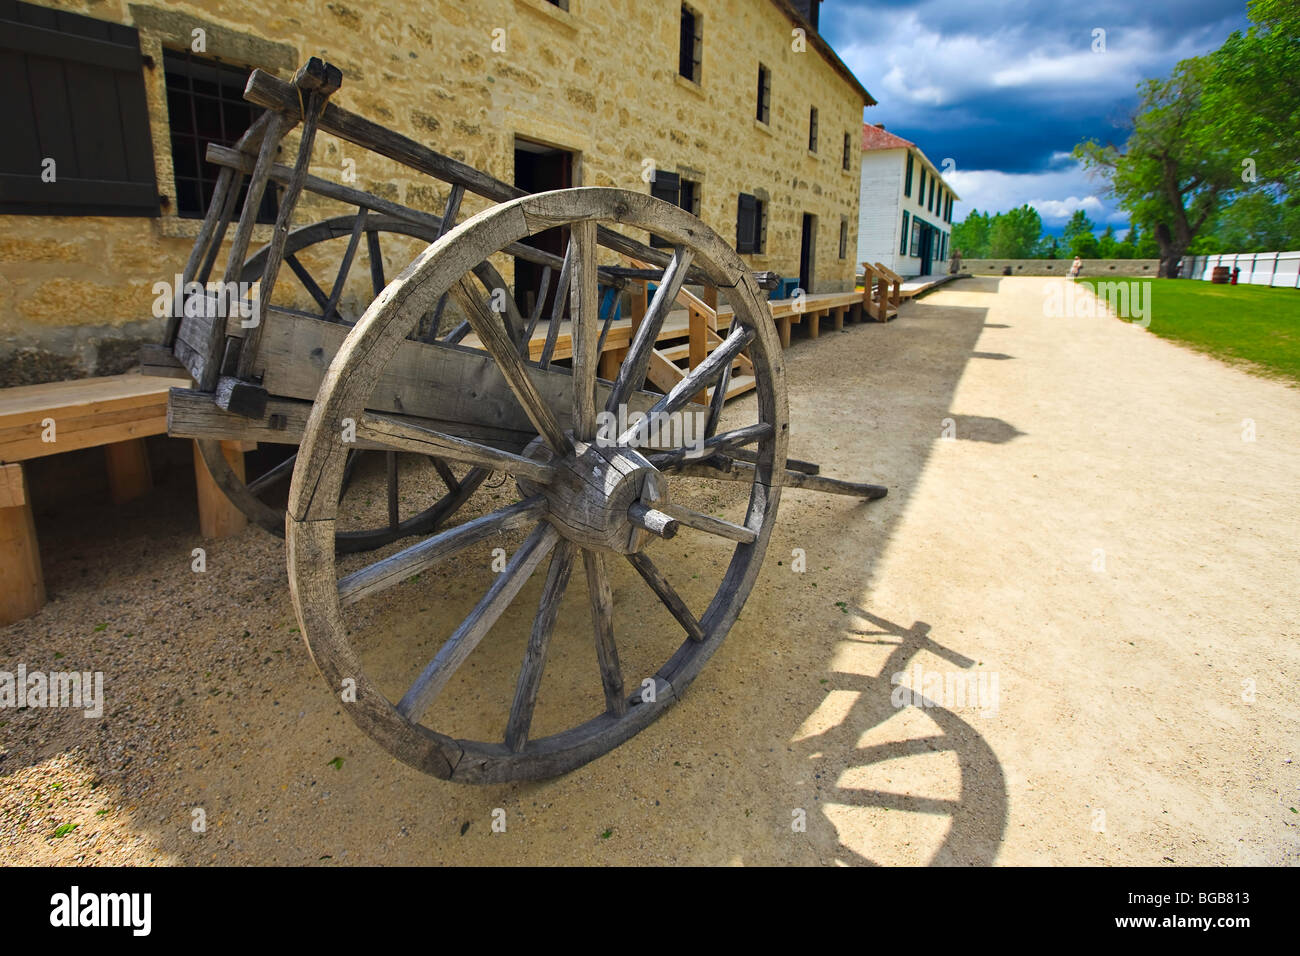 Wagon outside the Furloft/Saleshop (built in 1831) at Lower Fort Garry - a National Historic Site, Selkirk, Manitoba, Canada. Stock Photo